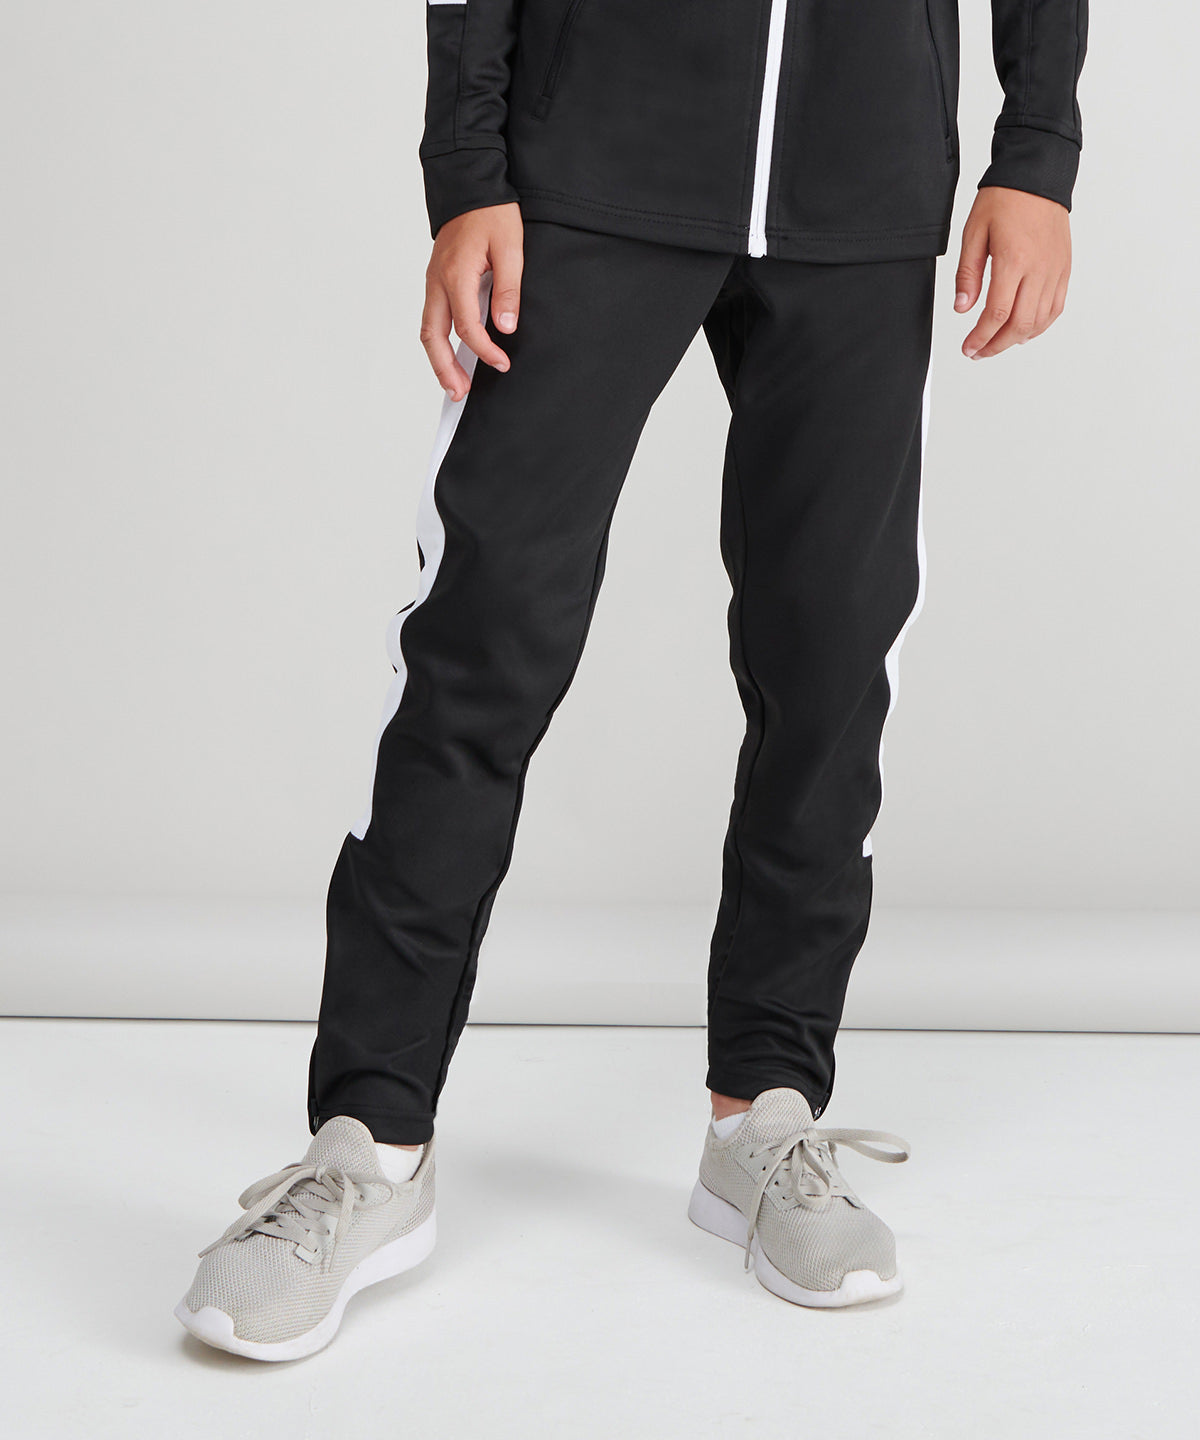 Buxur - Kids Knitted Tracksuit Pants